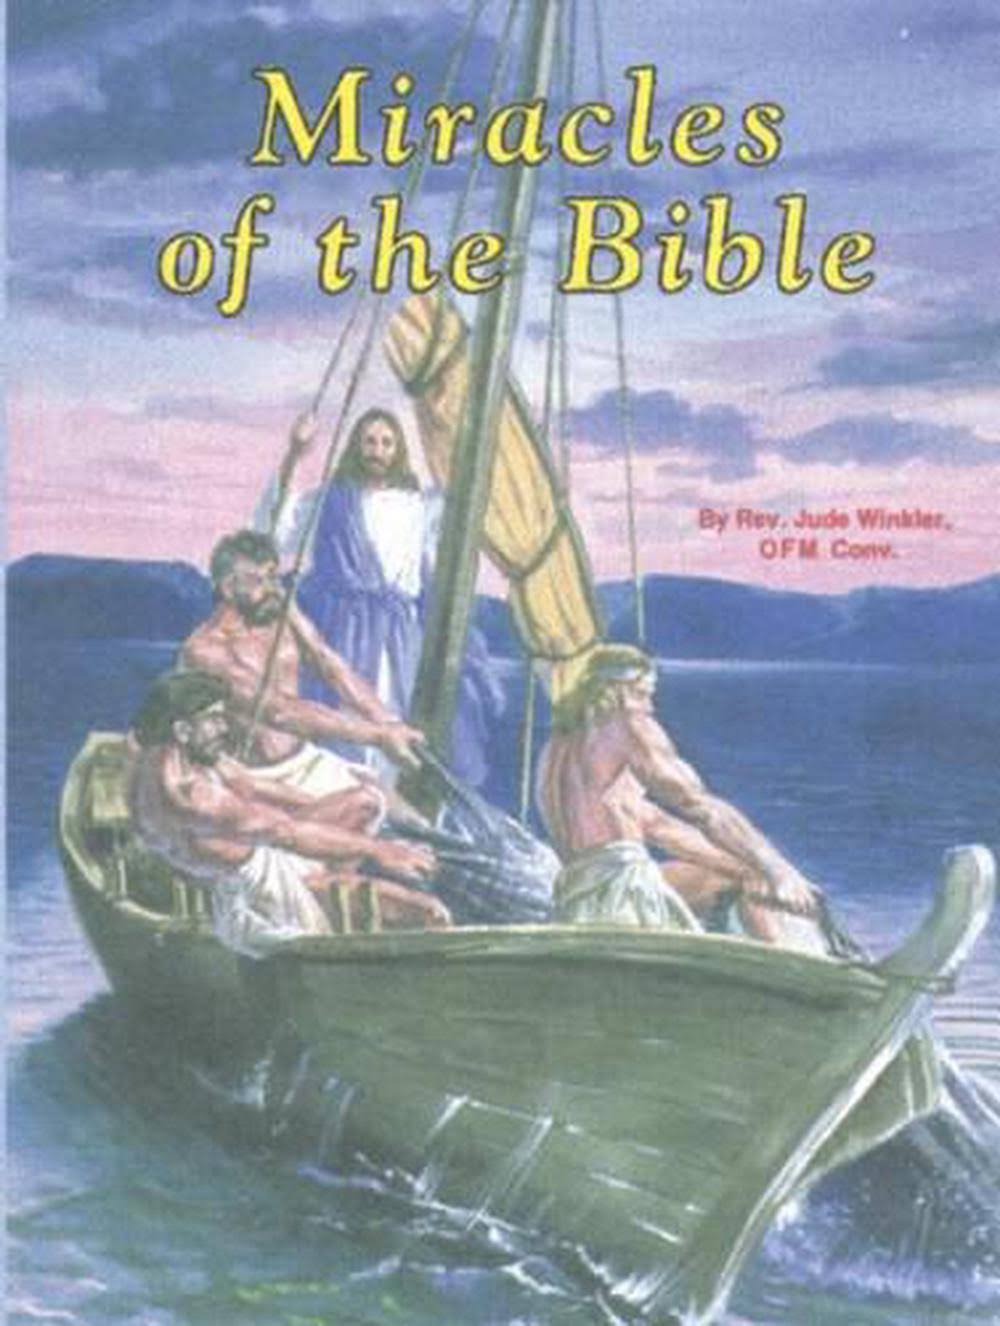 Miracles of the Bible - Jude Winkler